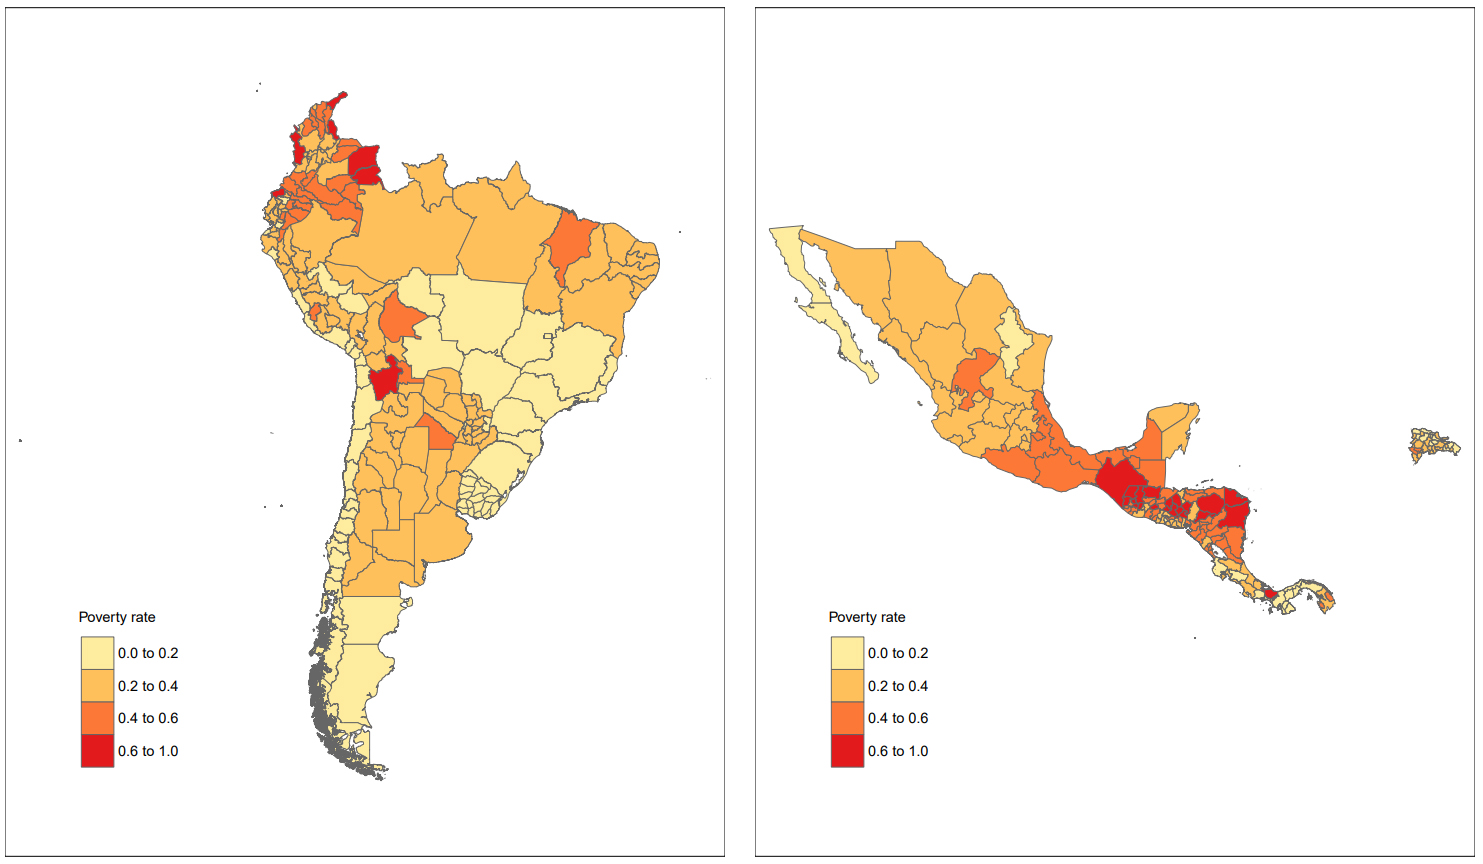 SAE estimates of the extreme poverty rate in Latin American countries based on the Multilevel Regression with PostStratification approach. Source: Prepared by the authors.